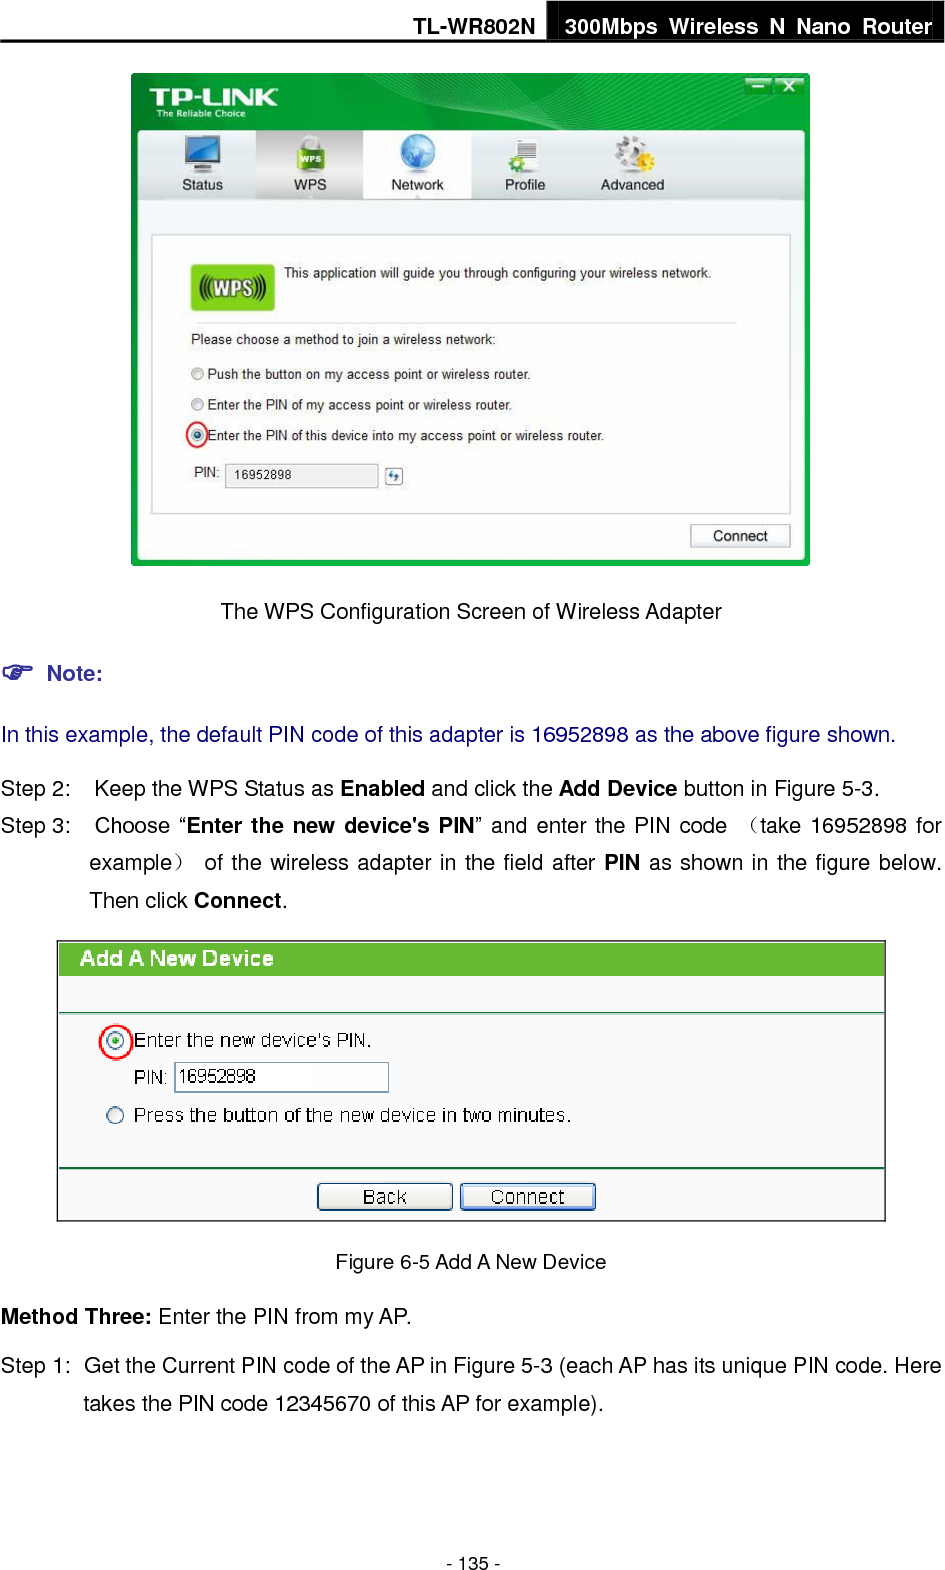 TL-WR802N 300Mbps  Wireless  N  Nano  Router  - 135 -  The WPS Configuration Screen of Wireless Adapter  Note: In this example, the default PIN code of this adapter is 16952898 as the above figure shown. Step 2:  Keep the WPS Status as Enabled and click the Add Device button in Figure 5-3. Step 3:  Choose “Enter the new device&apos;s PIN” and enter the PIN code  （take 16952898 for example）  of the wireless adapter in the field after PIN as shown in the figure below. Then click Connect.  Figure 6-5 Add A New Device Method Three: Enter the PIN from my AP. Step 1:  Get the Current PIN code of the AP in Figure 5-3 (each AP has its unique PIN code. Here takes the PIN code 12345670 of this AP for example). 